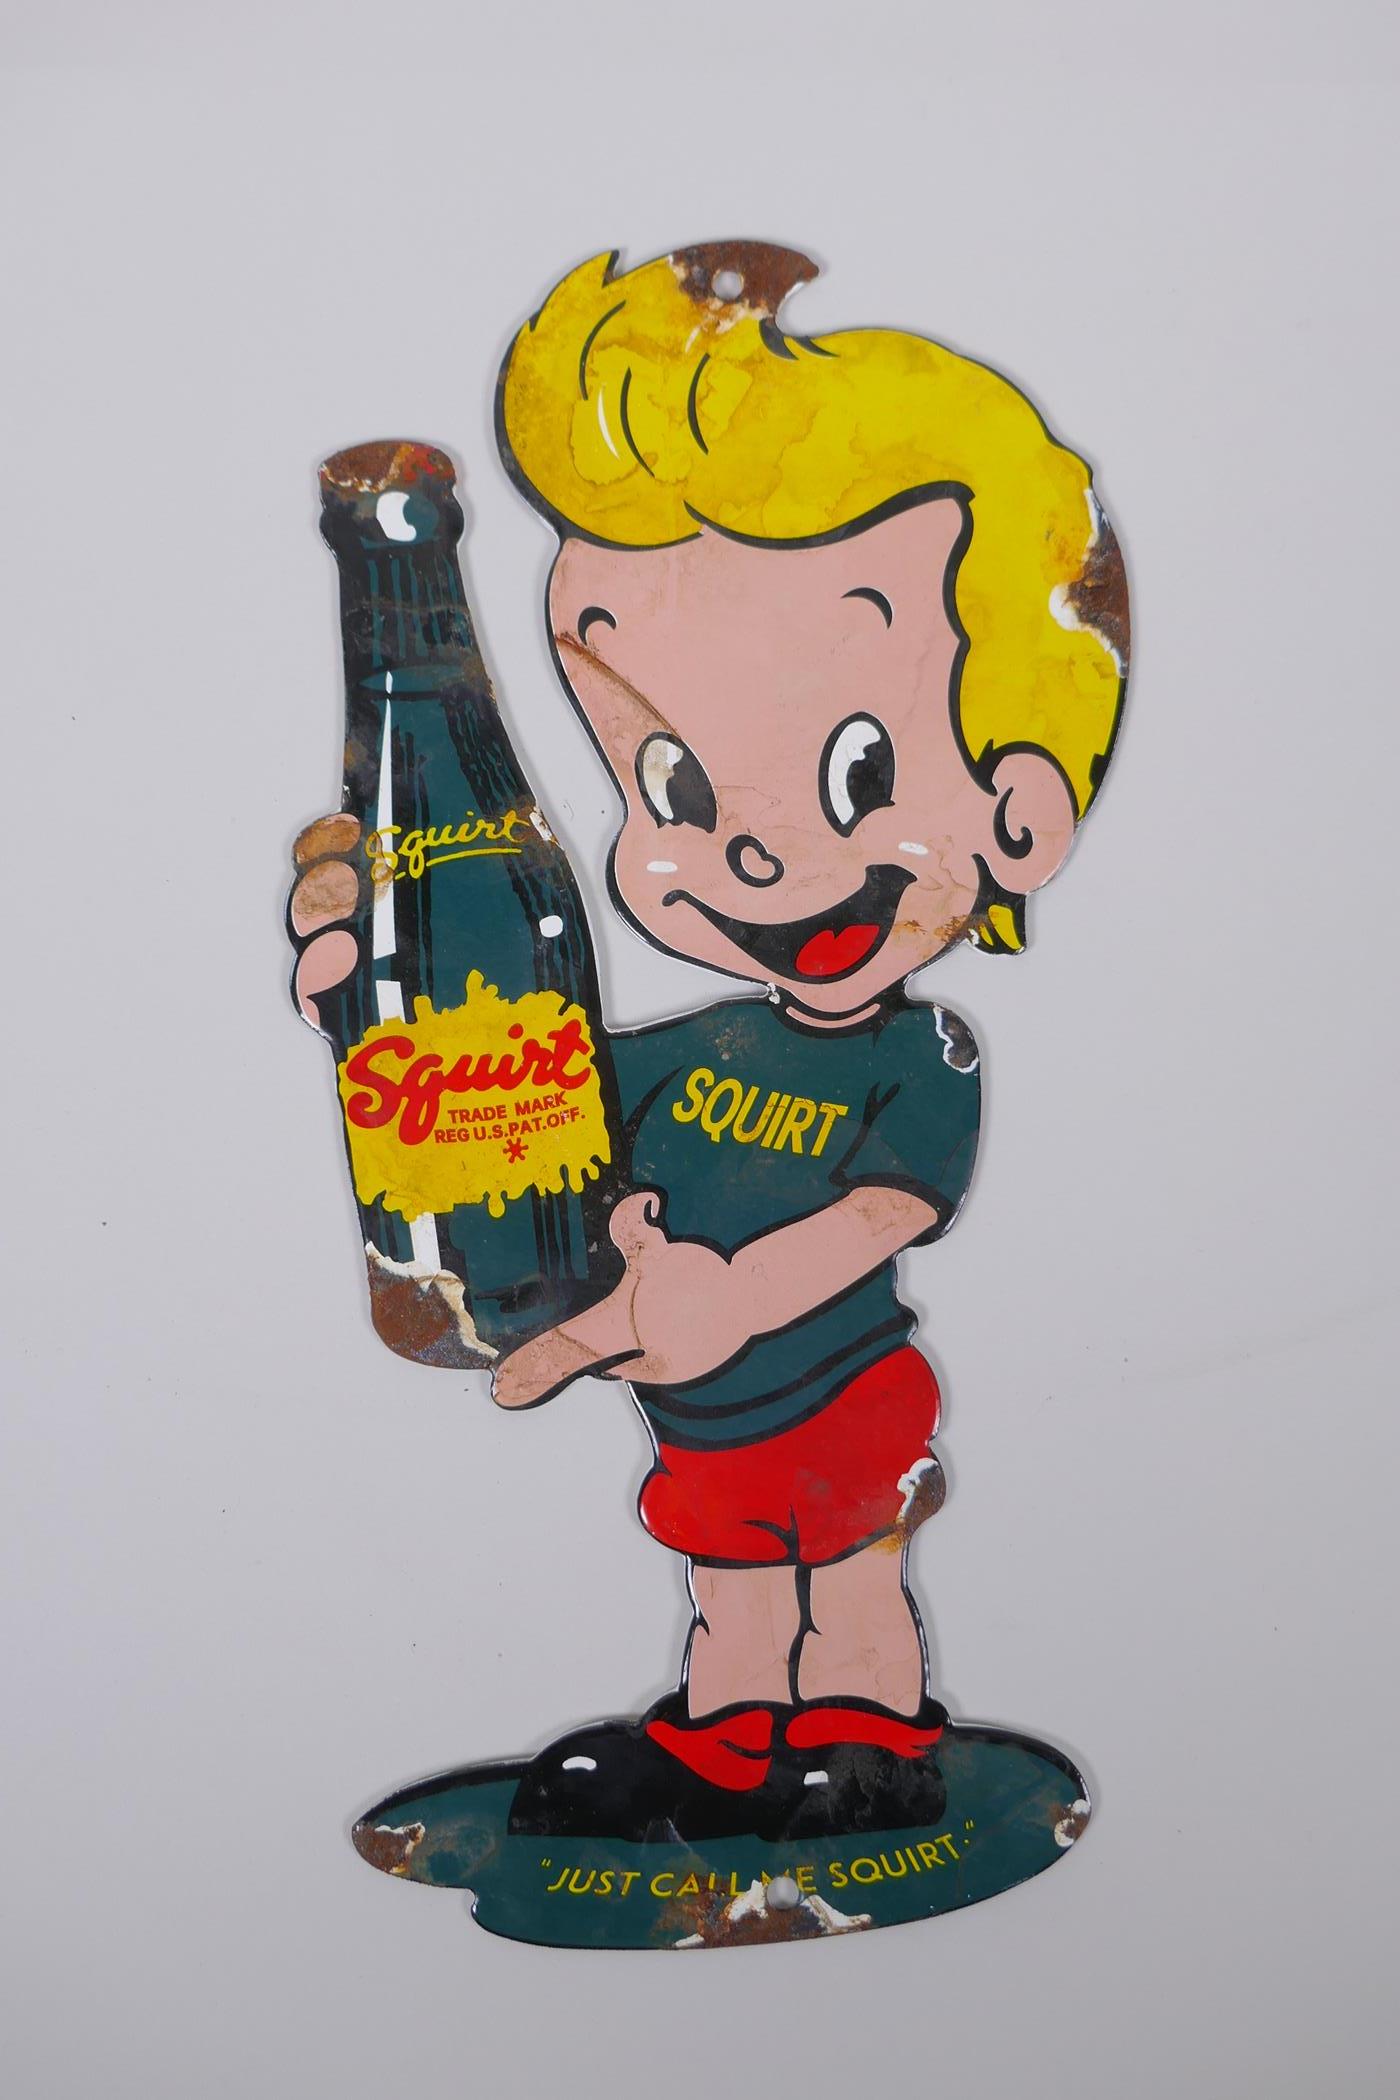 A vintage style 'Squirt' soda enamel advertising sign, 30cm high